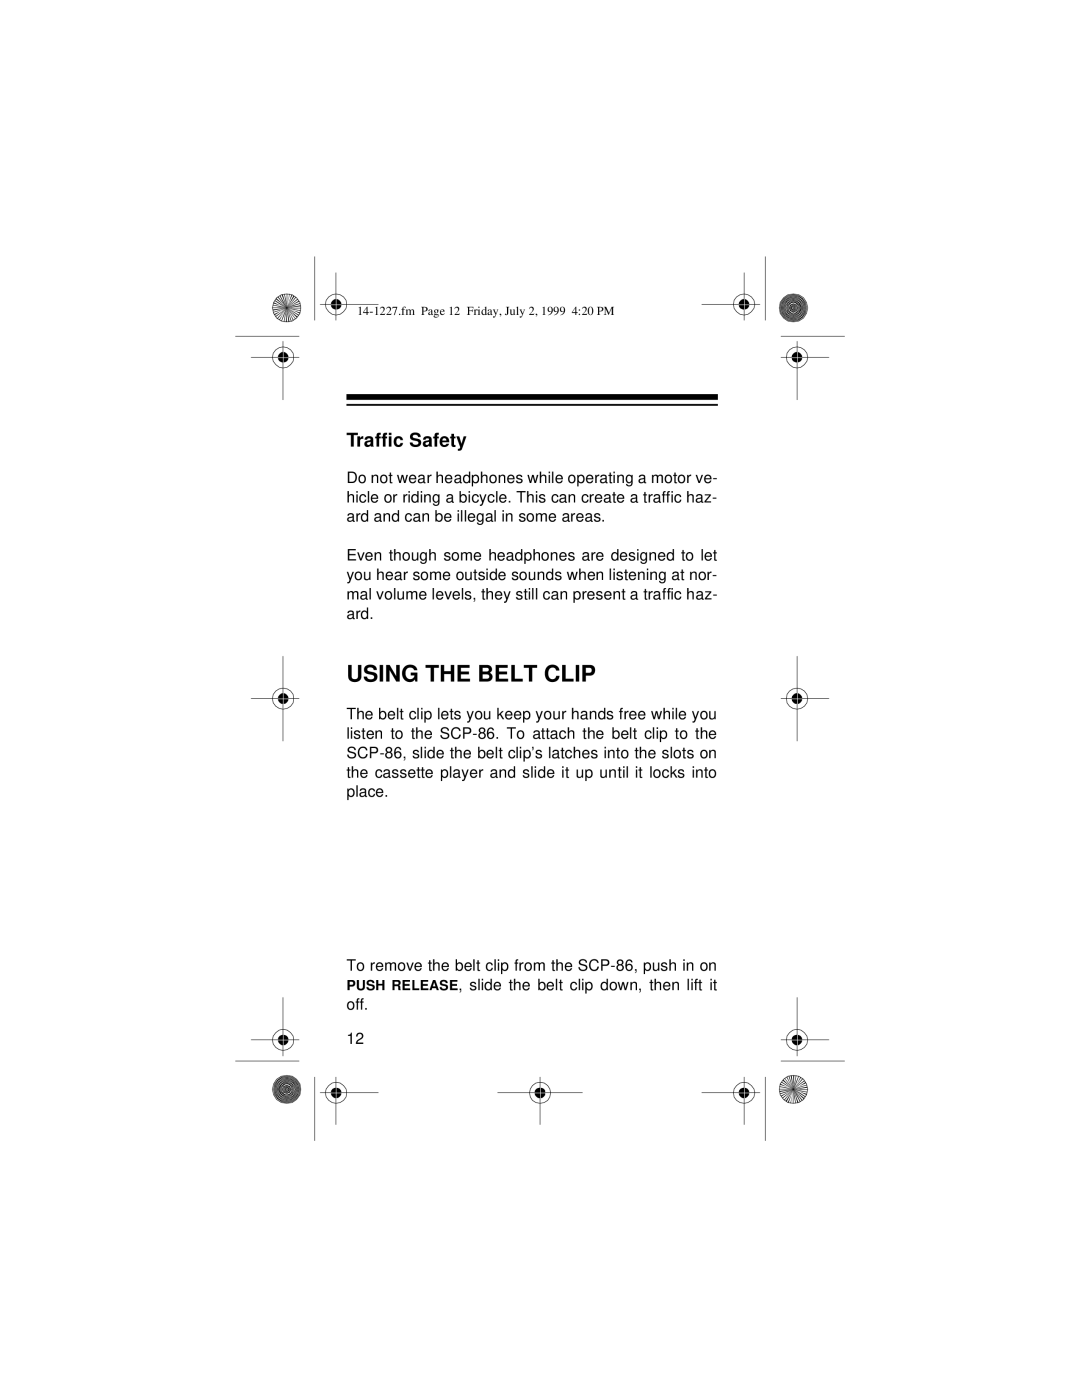 Optimus SCP-86 owner manual Using The Belt Clip, Traffic Safety 